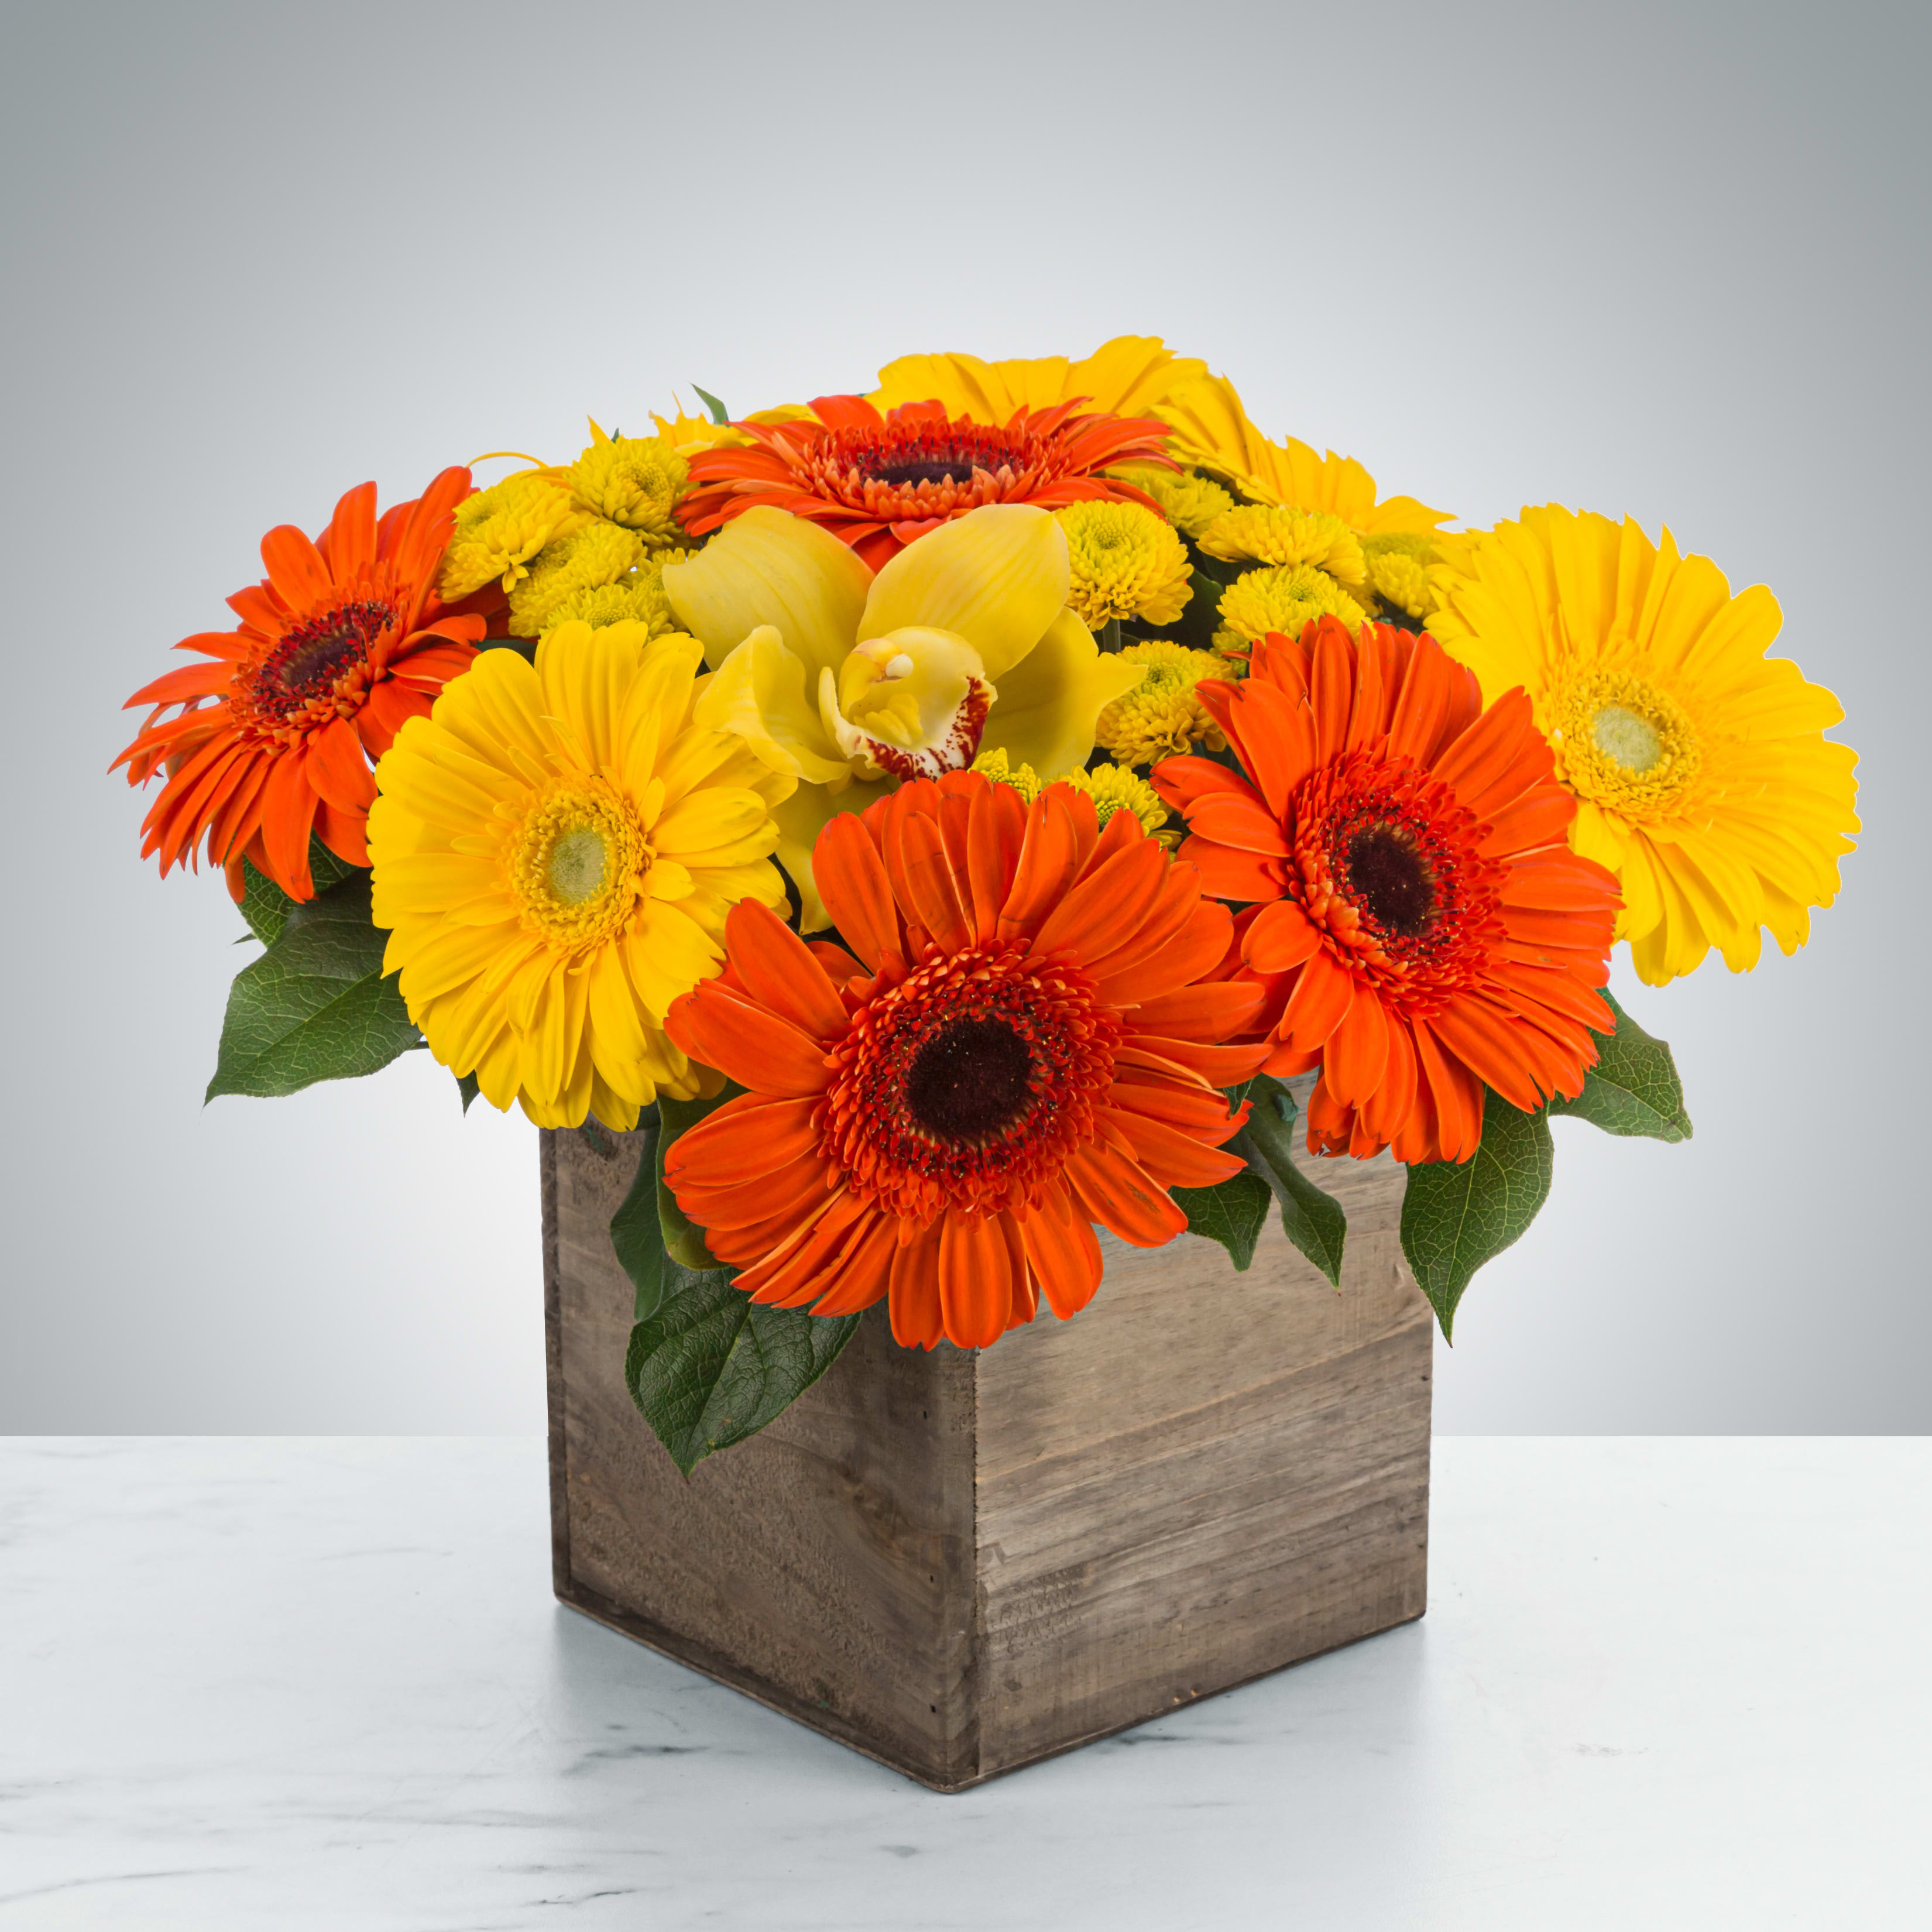 Storybook by BloomNation™ - Everybody loves daisies! Send this cheerful wooden box featuring orange and yellow gerbera daisies to your gran and gramps for Grandparents Day or your employee on Admin Appreciation day. *Containers are based on available inventory* Approximate Dimensions: 13&quot;D x 10&quot;H